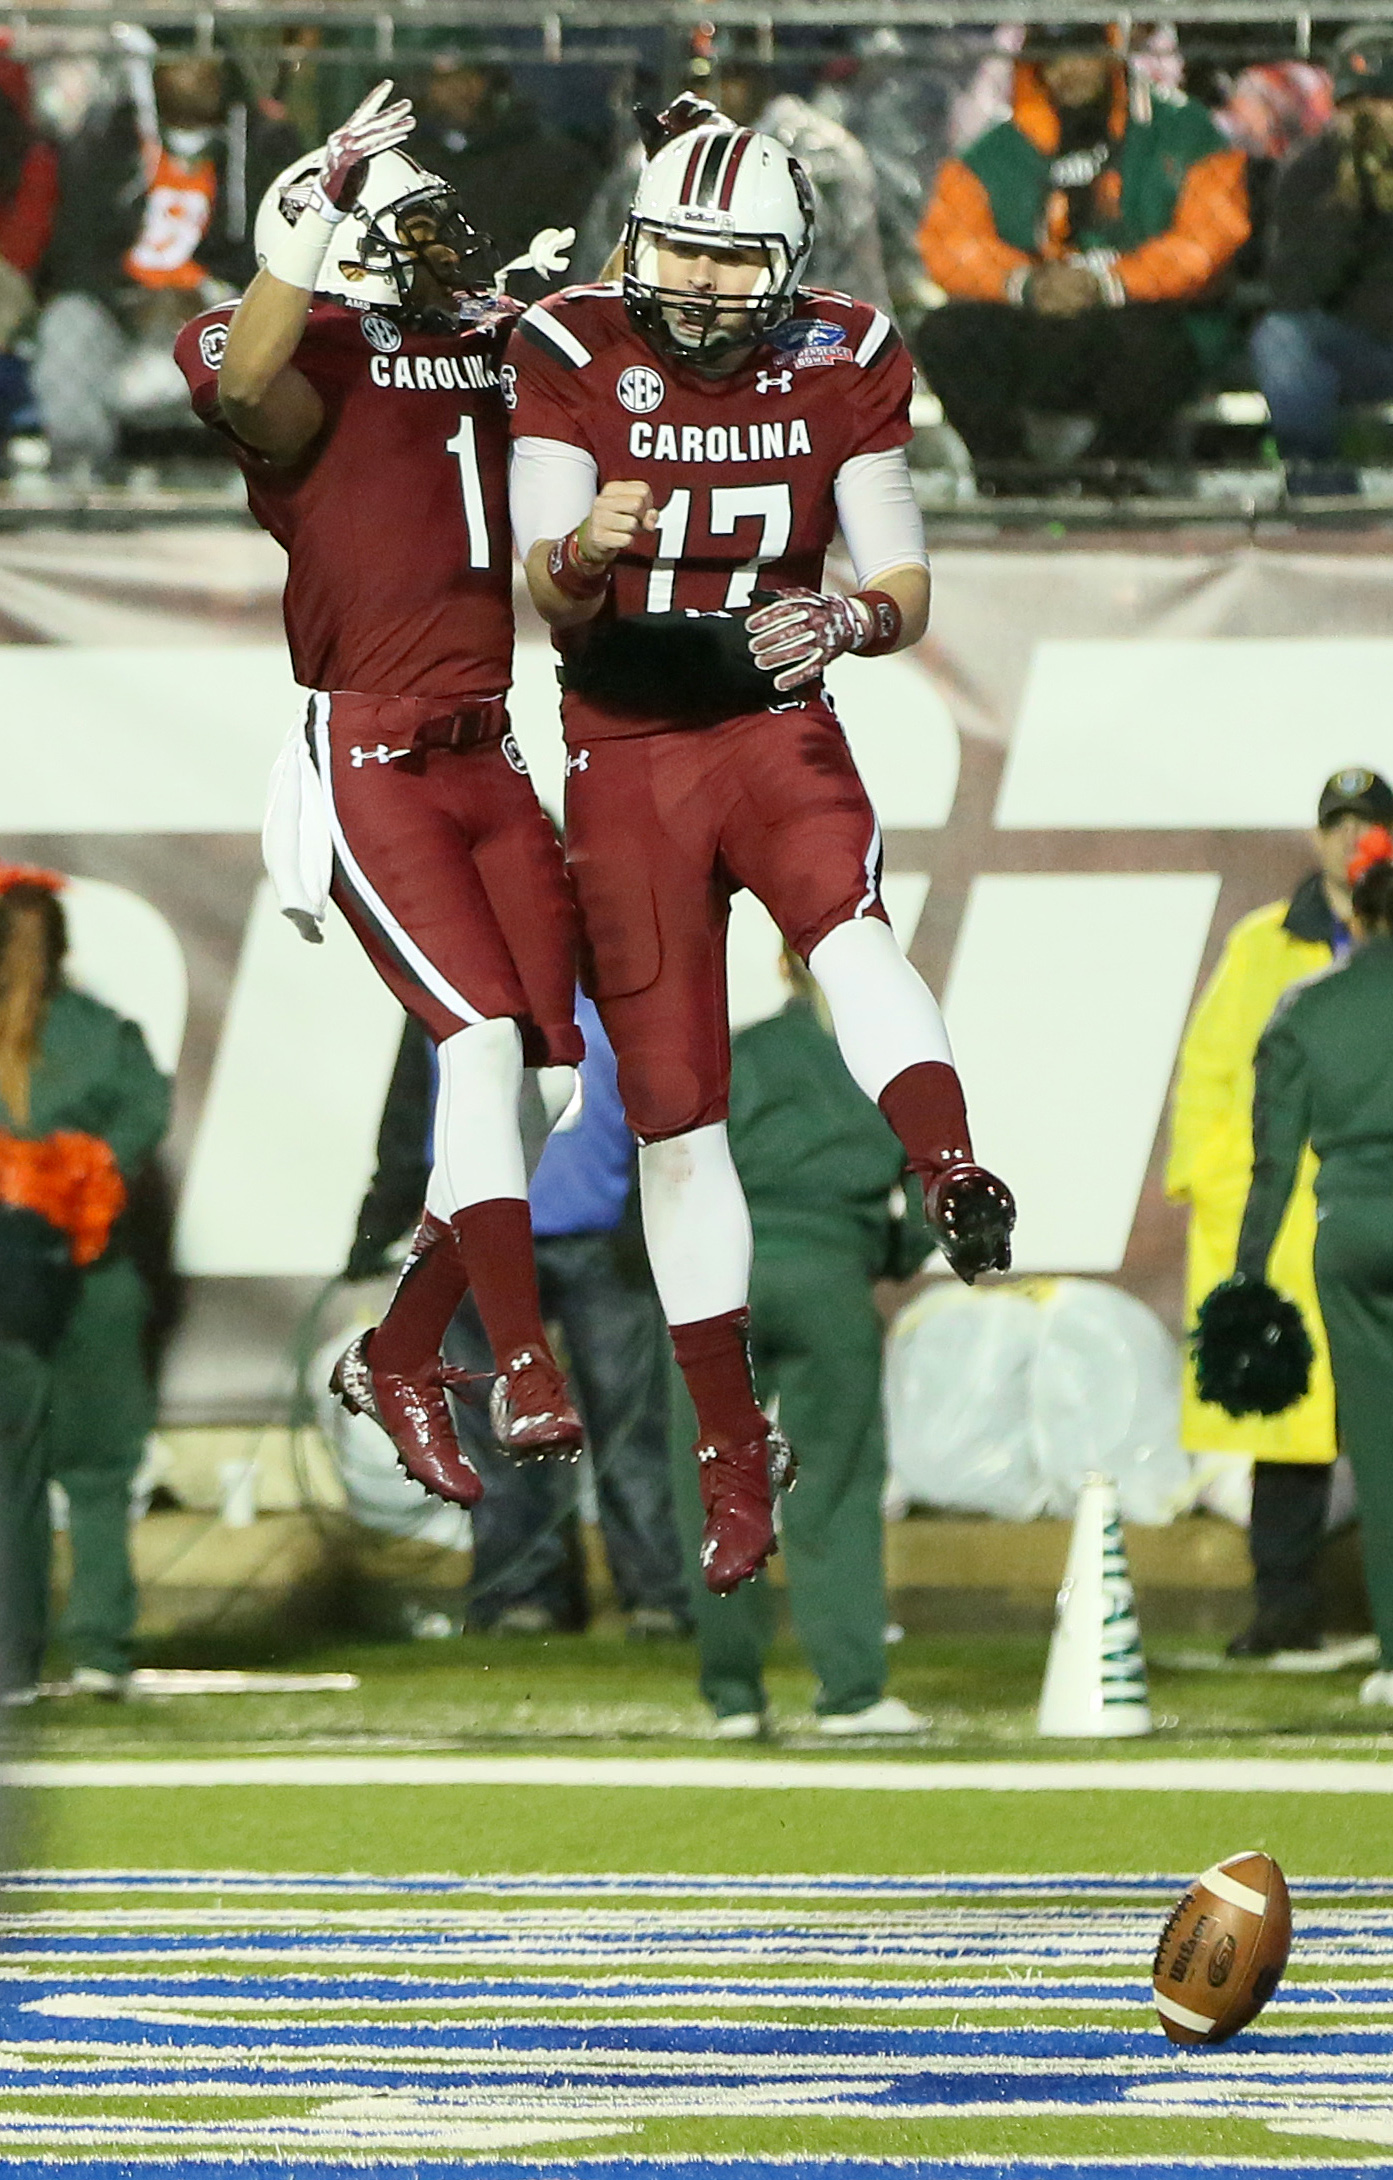 Dec 27, 2014; Shreveport, LA, USA; South Carolina Gamecocks quarterback Dylan Thompson (17) celebrates with wide receiver Damiere Byrd (1) after scoring a touchdown during the fourth quarter against the Miami Hurricanes in the 2014 Independence Bowl at Independence Stadium. South Carolina defeated Miami 24-21. (Nelson Chenault-USA TODAY Sports)